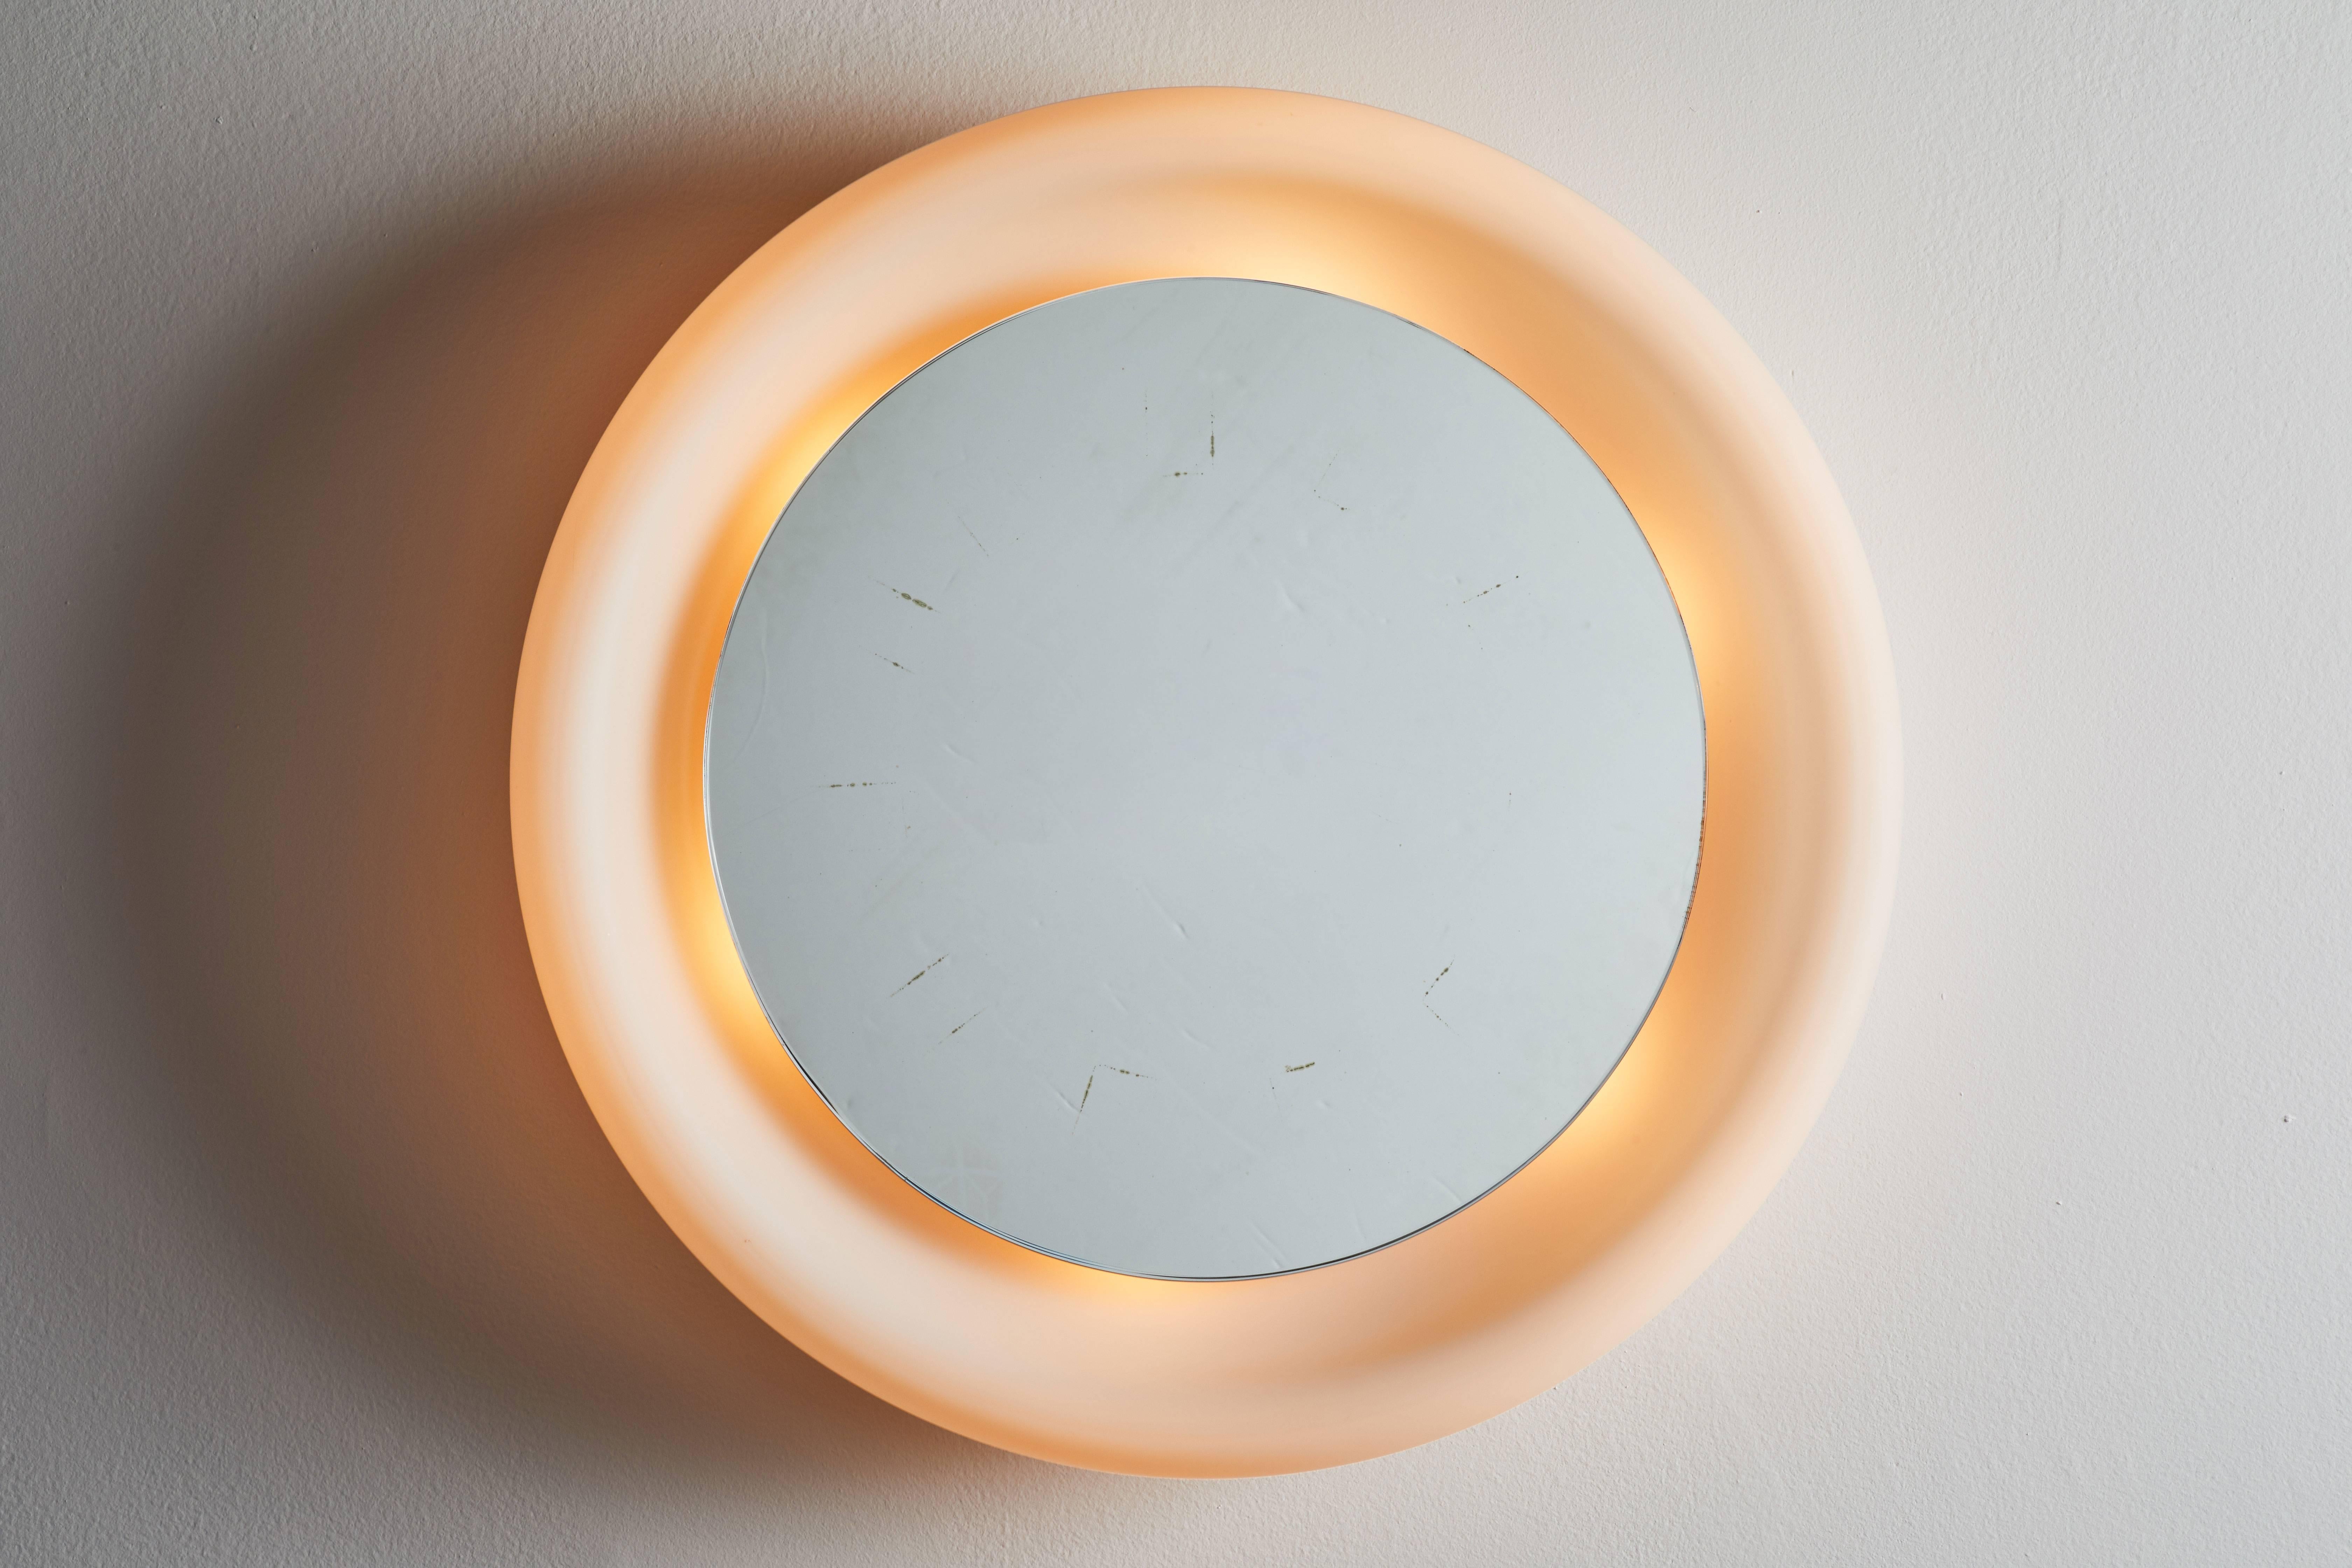 Luminous mirror designed by Gianna Celada for Fontana Arte in Italy, circa 1960s. Satin opal glass, polished and mirrored glass. Wired for US junction boxes. Takes one E27 100w maximum bulb. Literature: See: Fontana Arte. News '70, p. 55 (ceiling